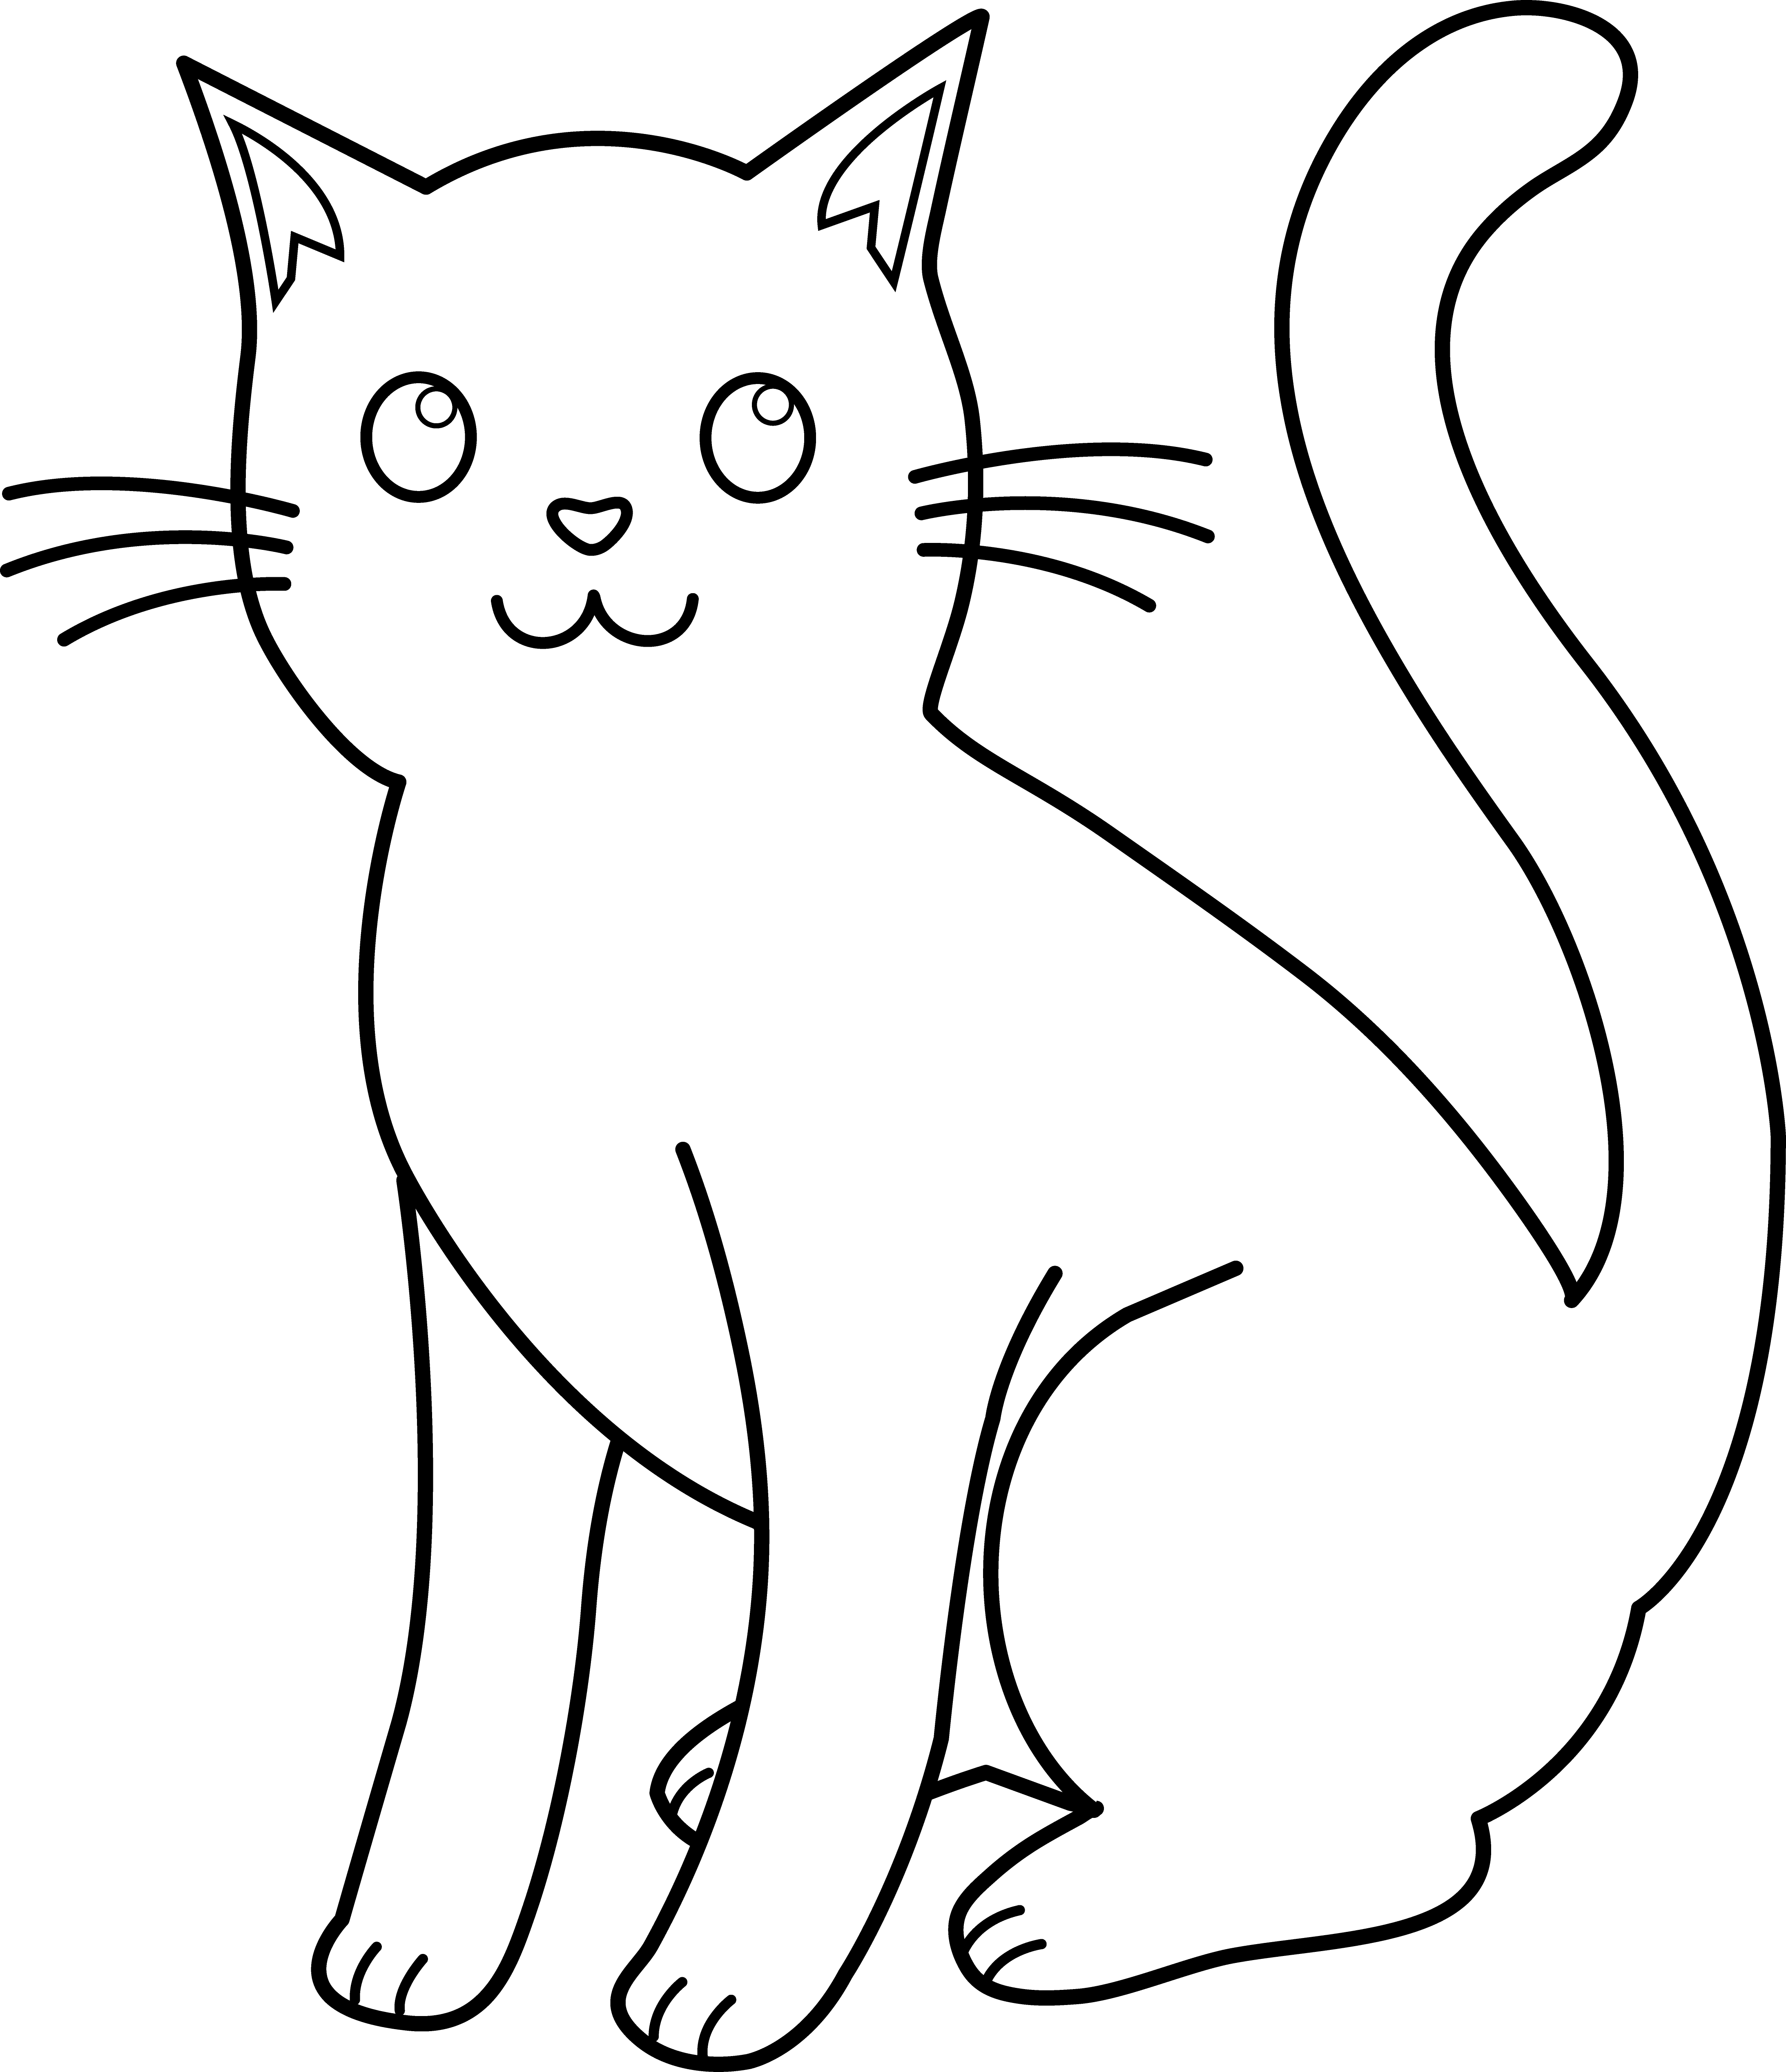 Kittens clipart pusa, Kittens pusa Transparent FREE for download on